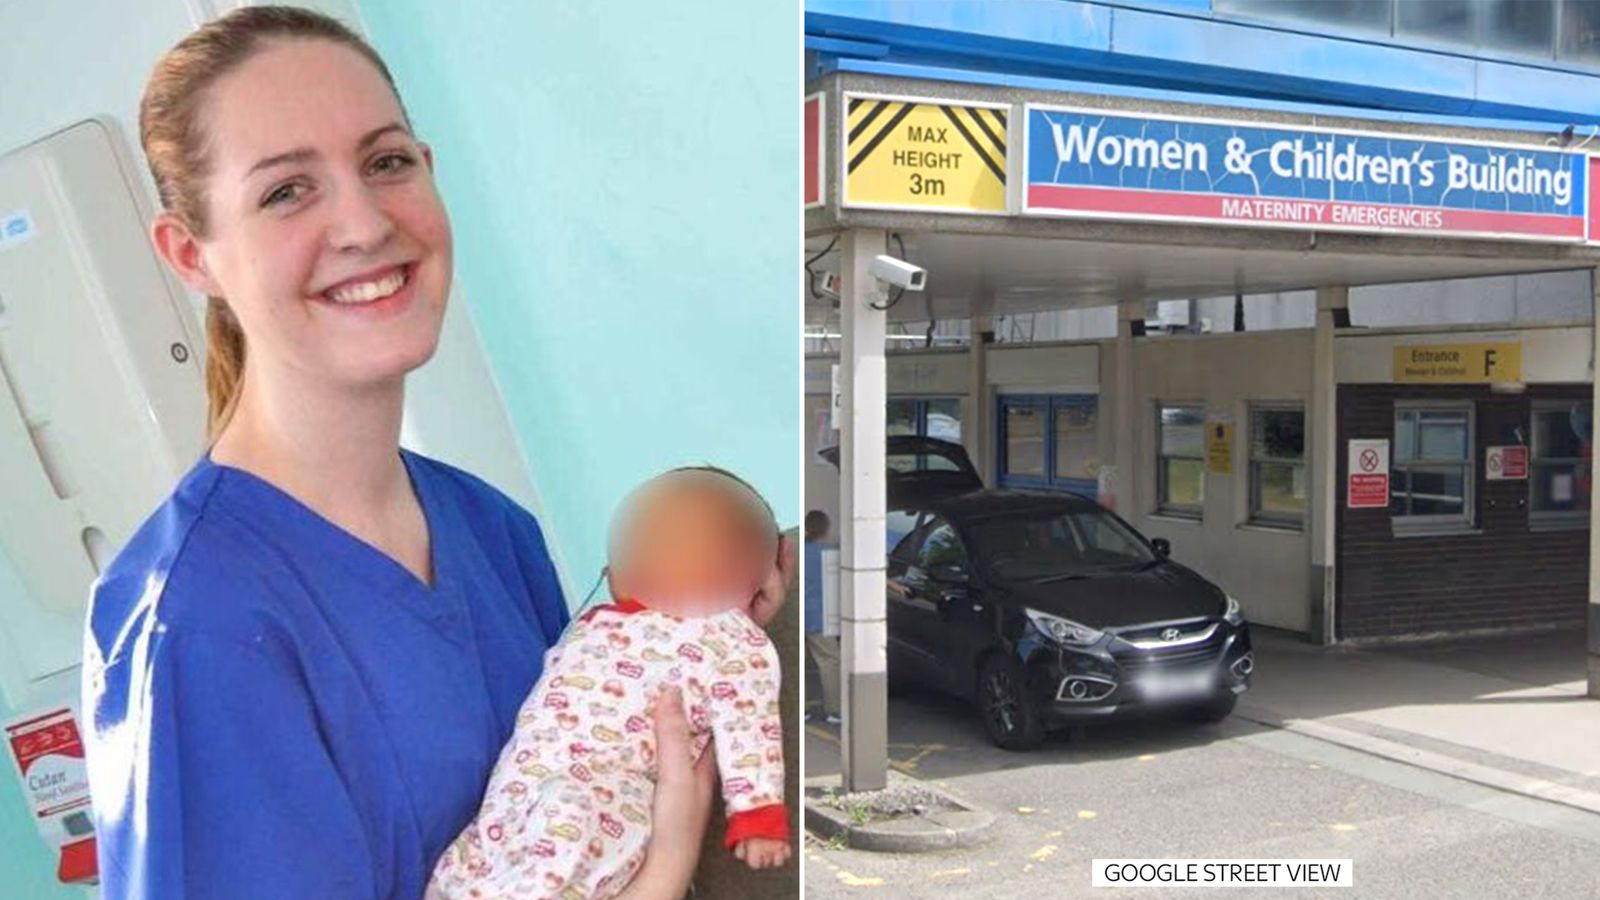 Lucy Letby trial: Mum walked in on nurse as she was killing baby, court hears